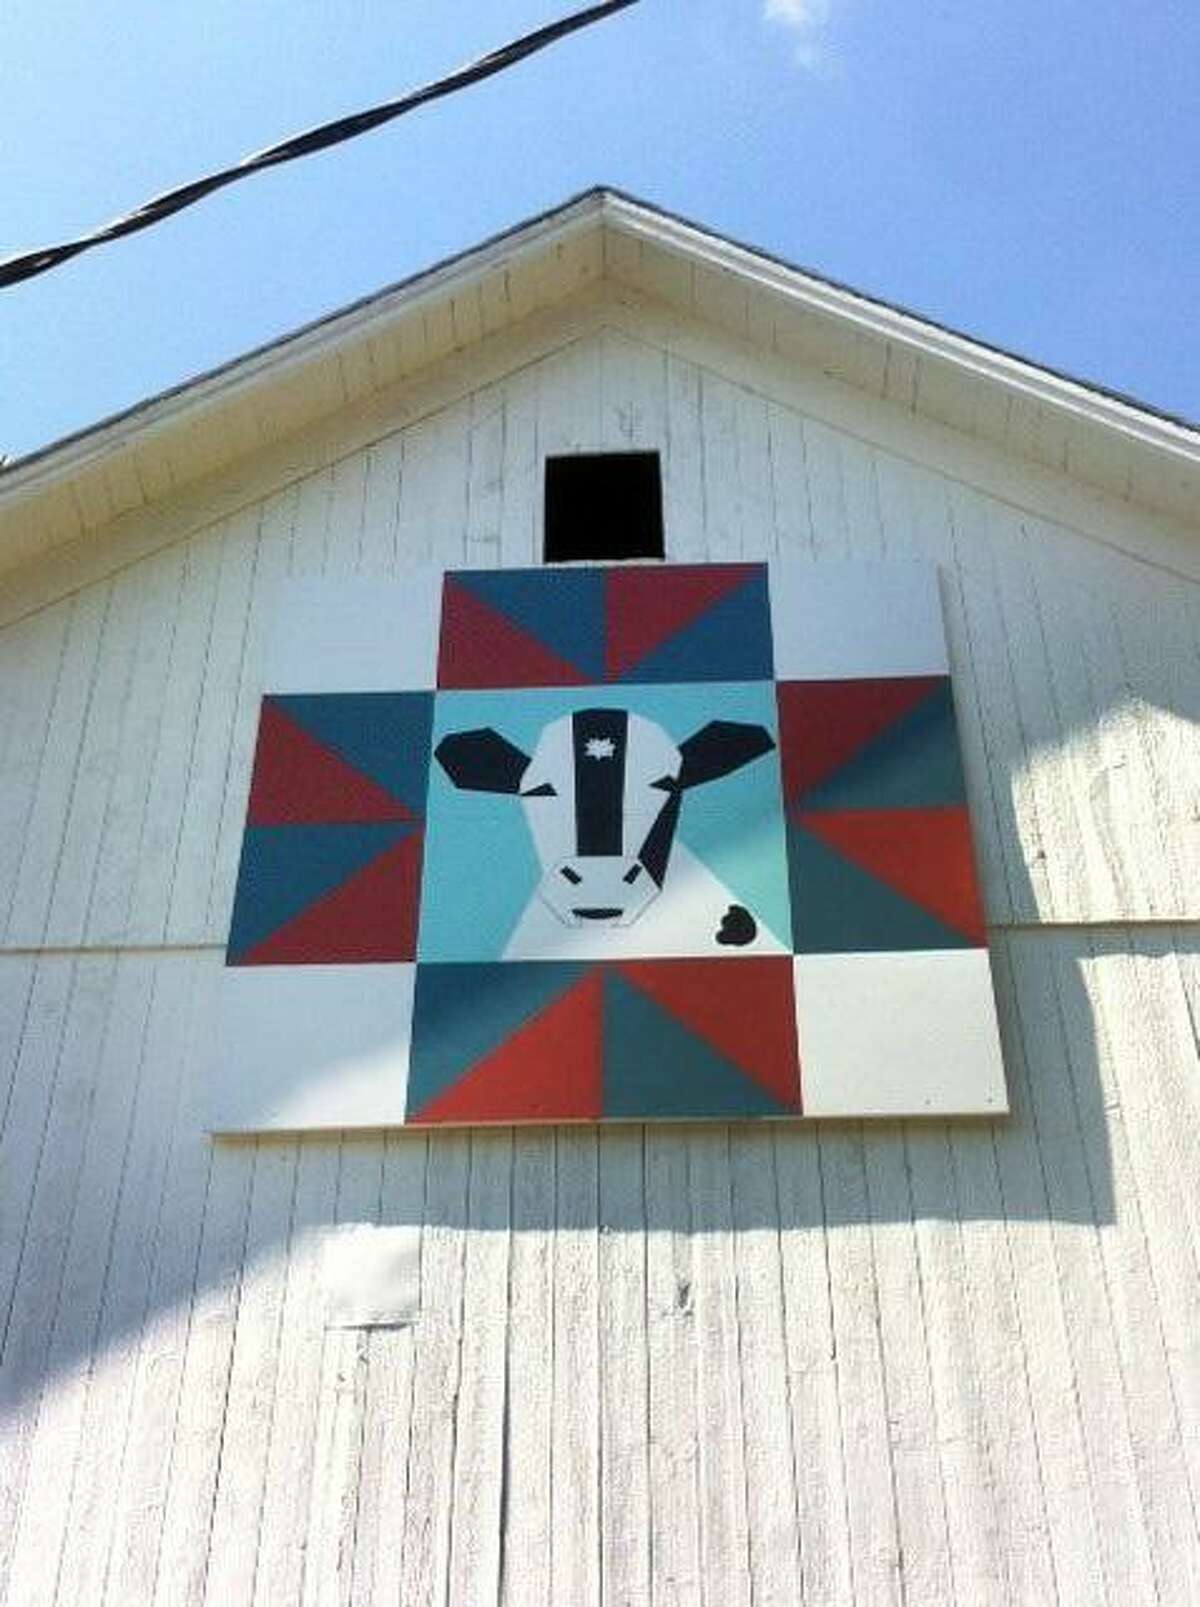 A quilt painting at 19 Wheaton Rd. in New Milford. New Milford will be the first Connecticut town to have a barn quilt trail  several barns with quiltlike painted patches on walls. The point of the endeavor is to bring attention to folk art and the towns agricultural roots.